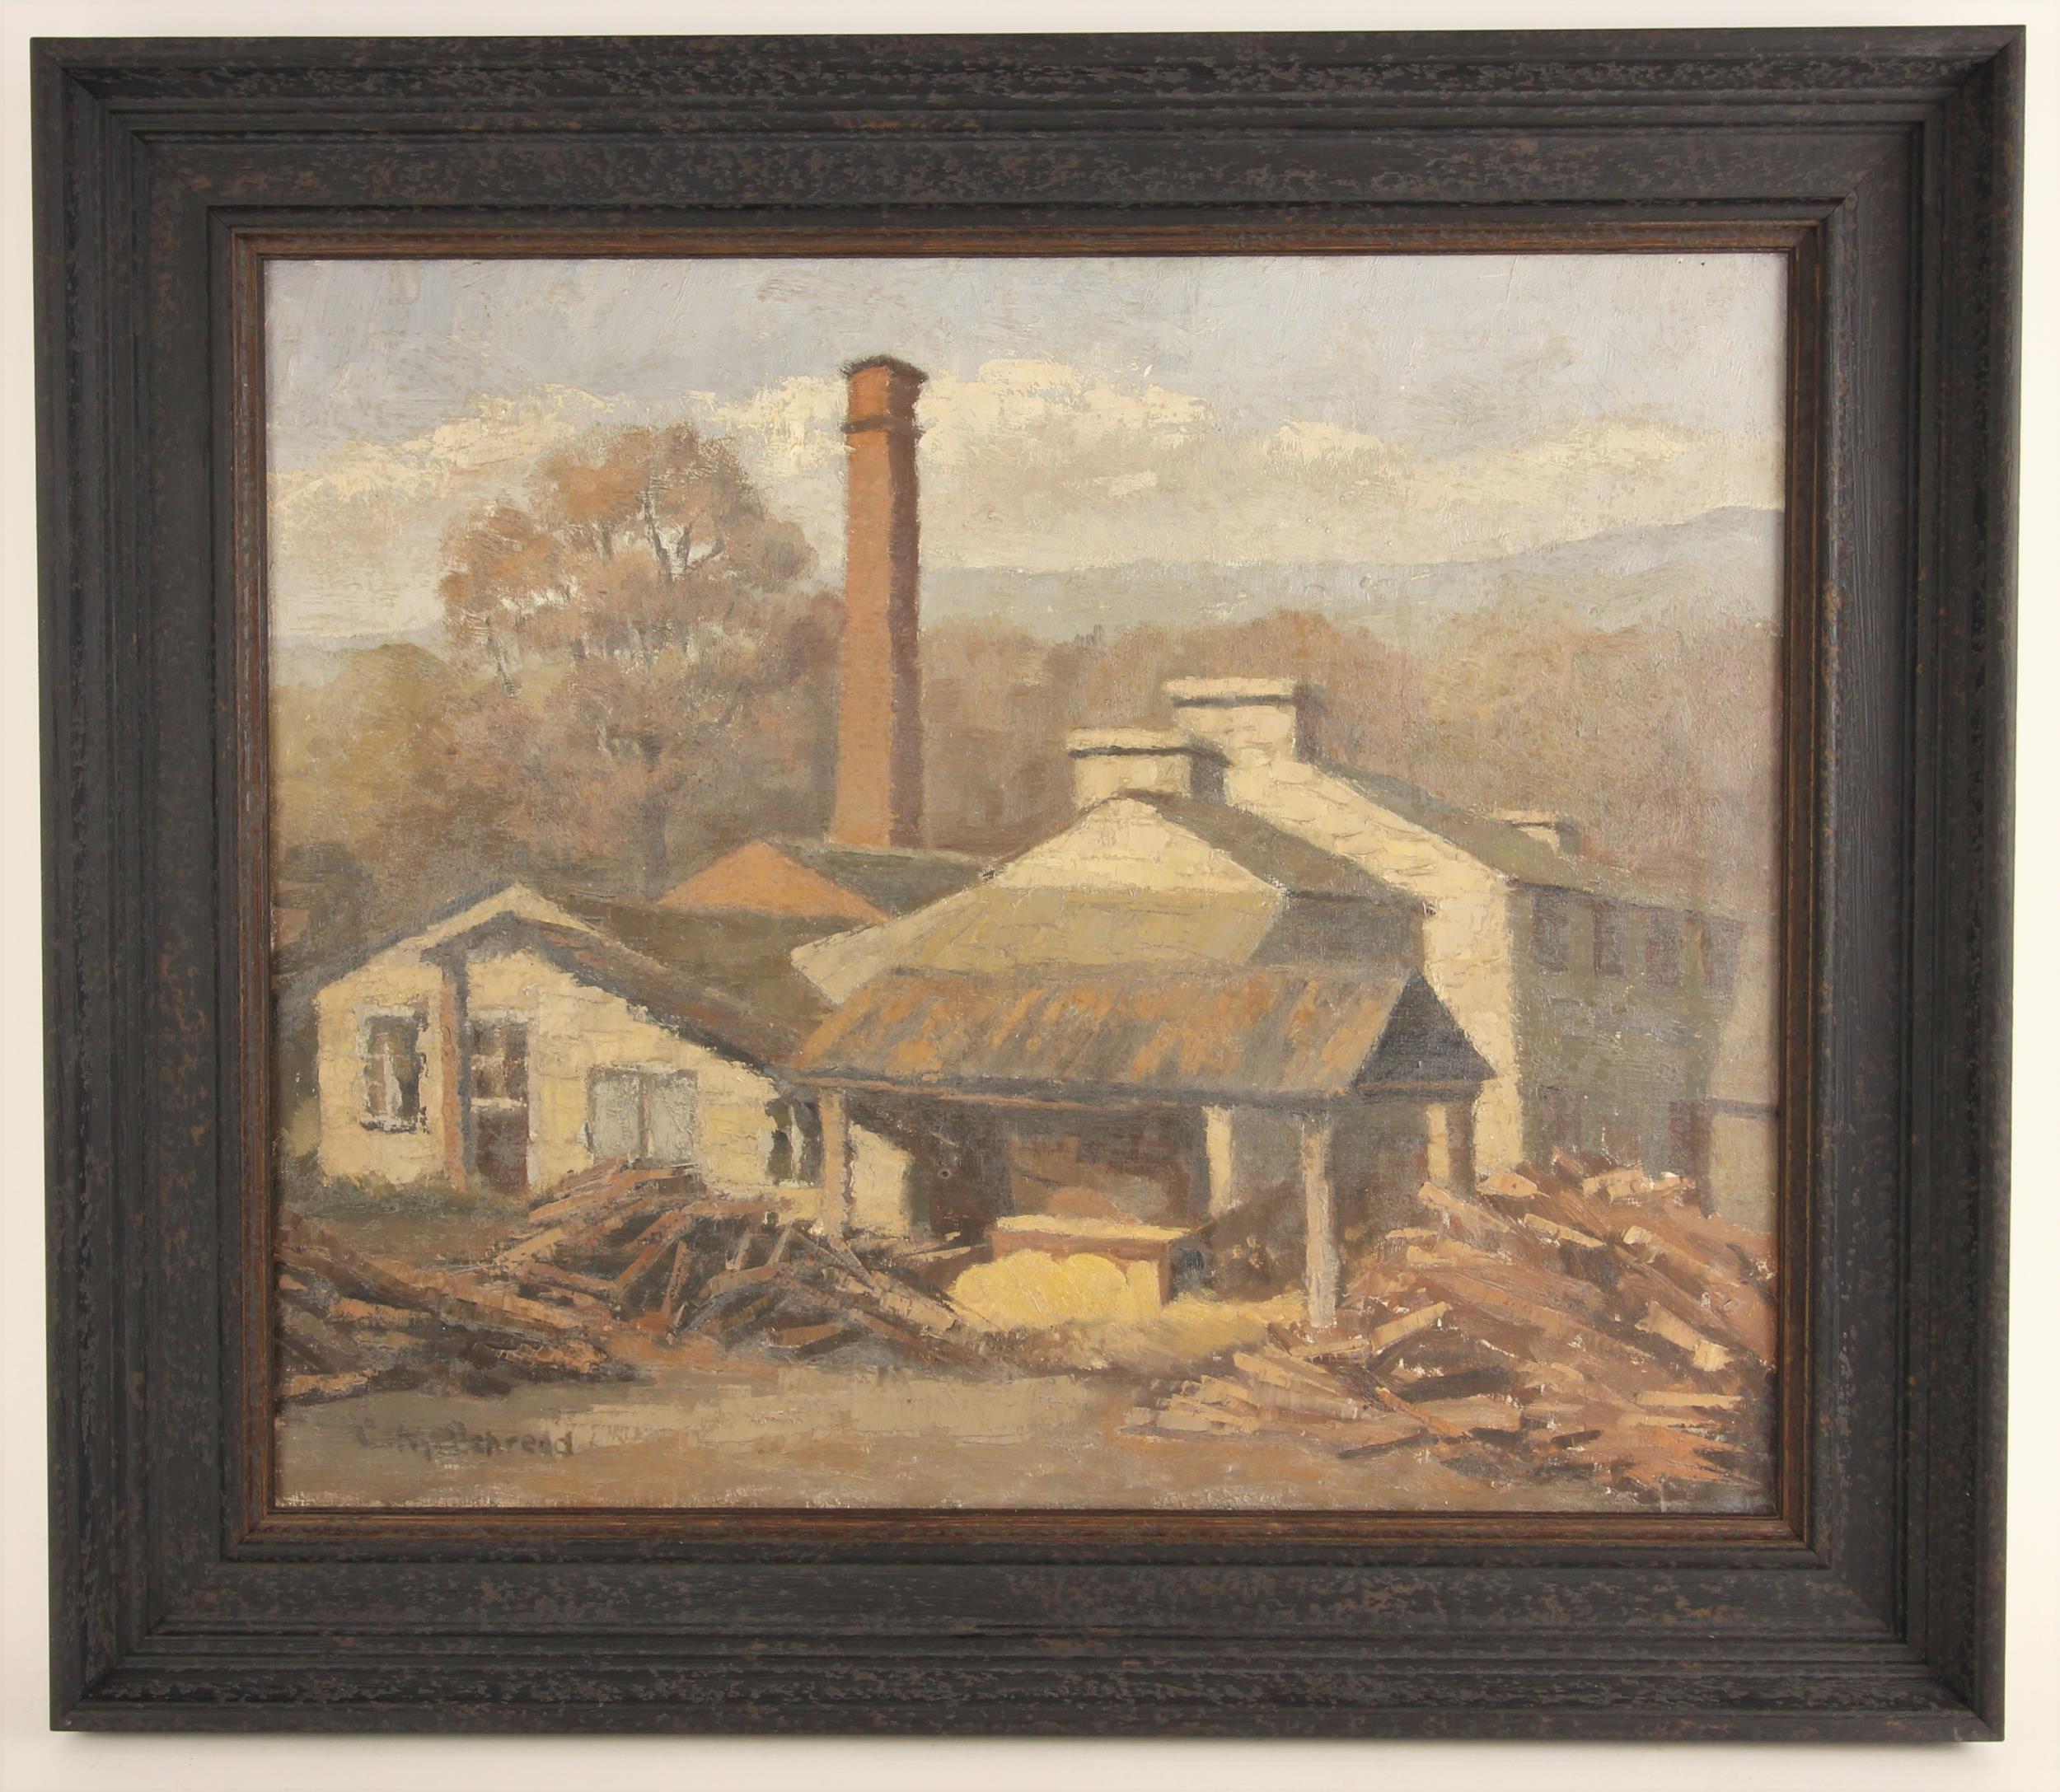 C M Behrend (British school, 20th century), A saw mill, Oil on canvas, Signed lower left, artist's